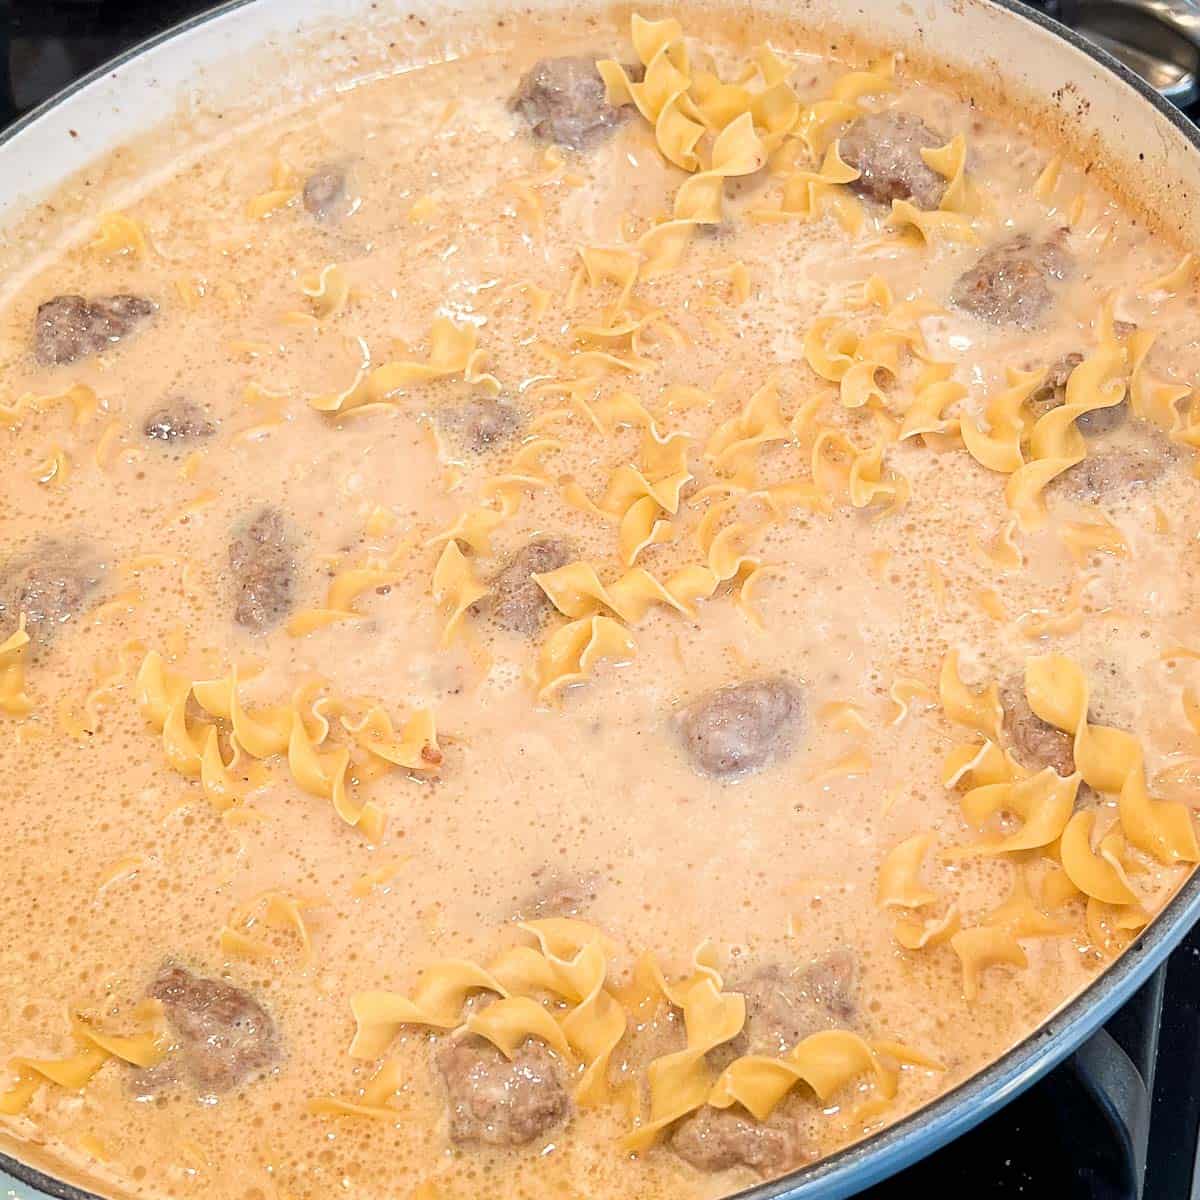 One Pot Swedish Meatballs and gravy with uncooked egg noodles added.